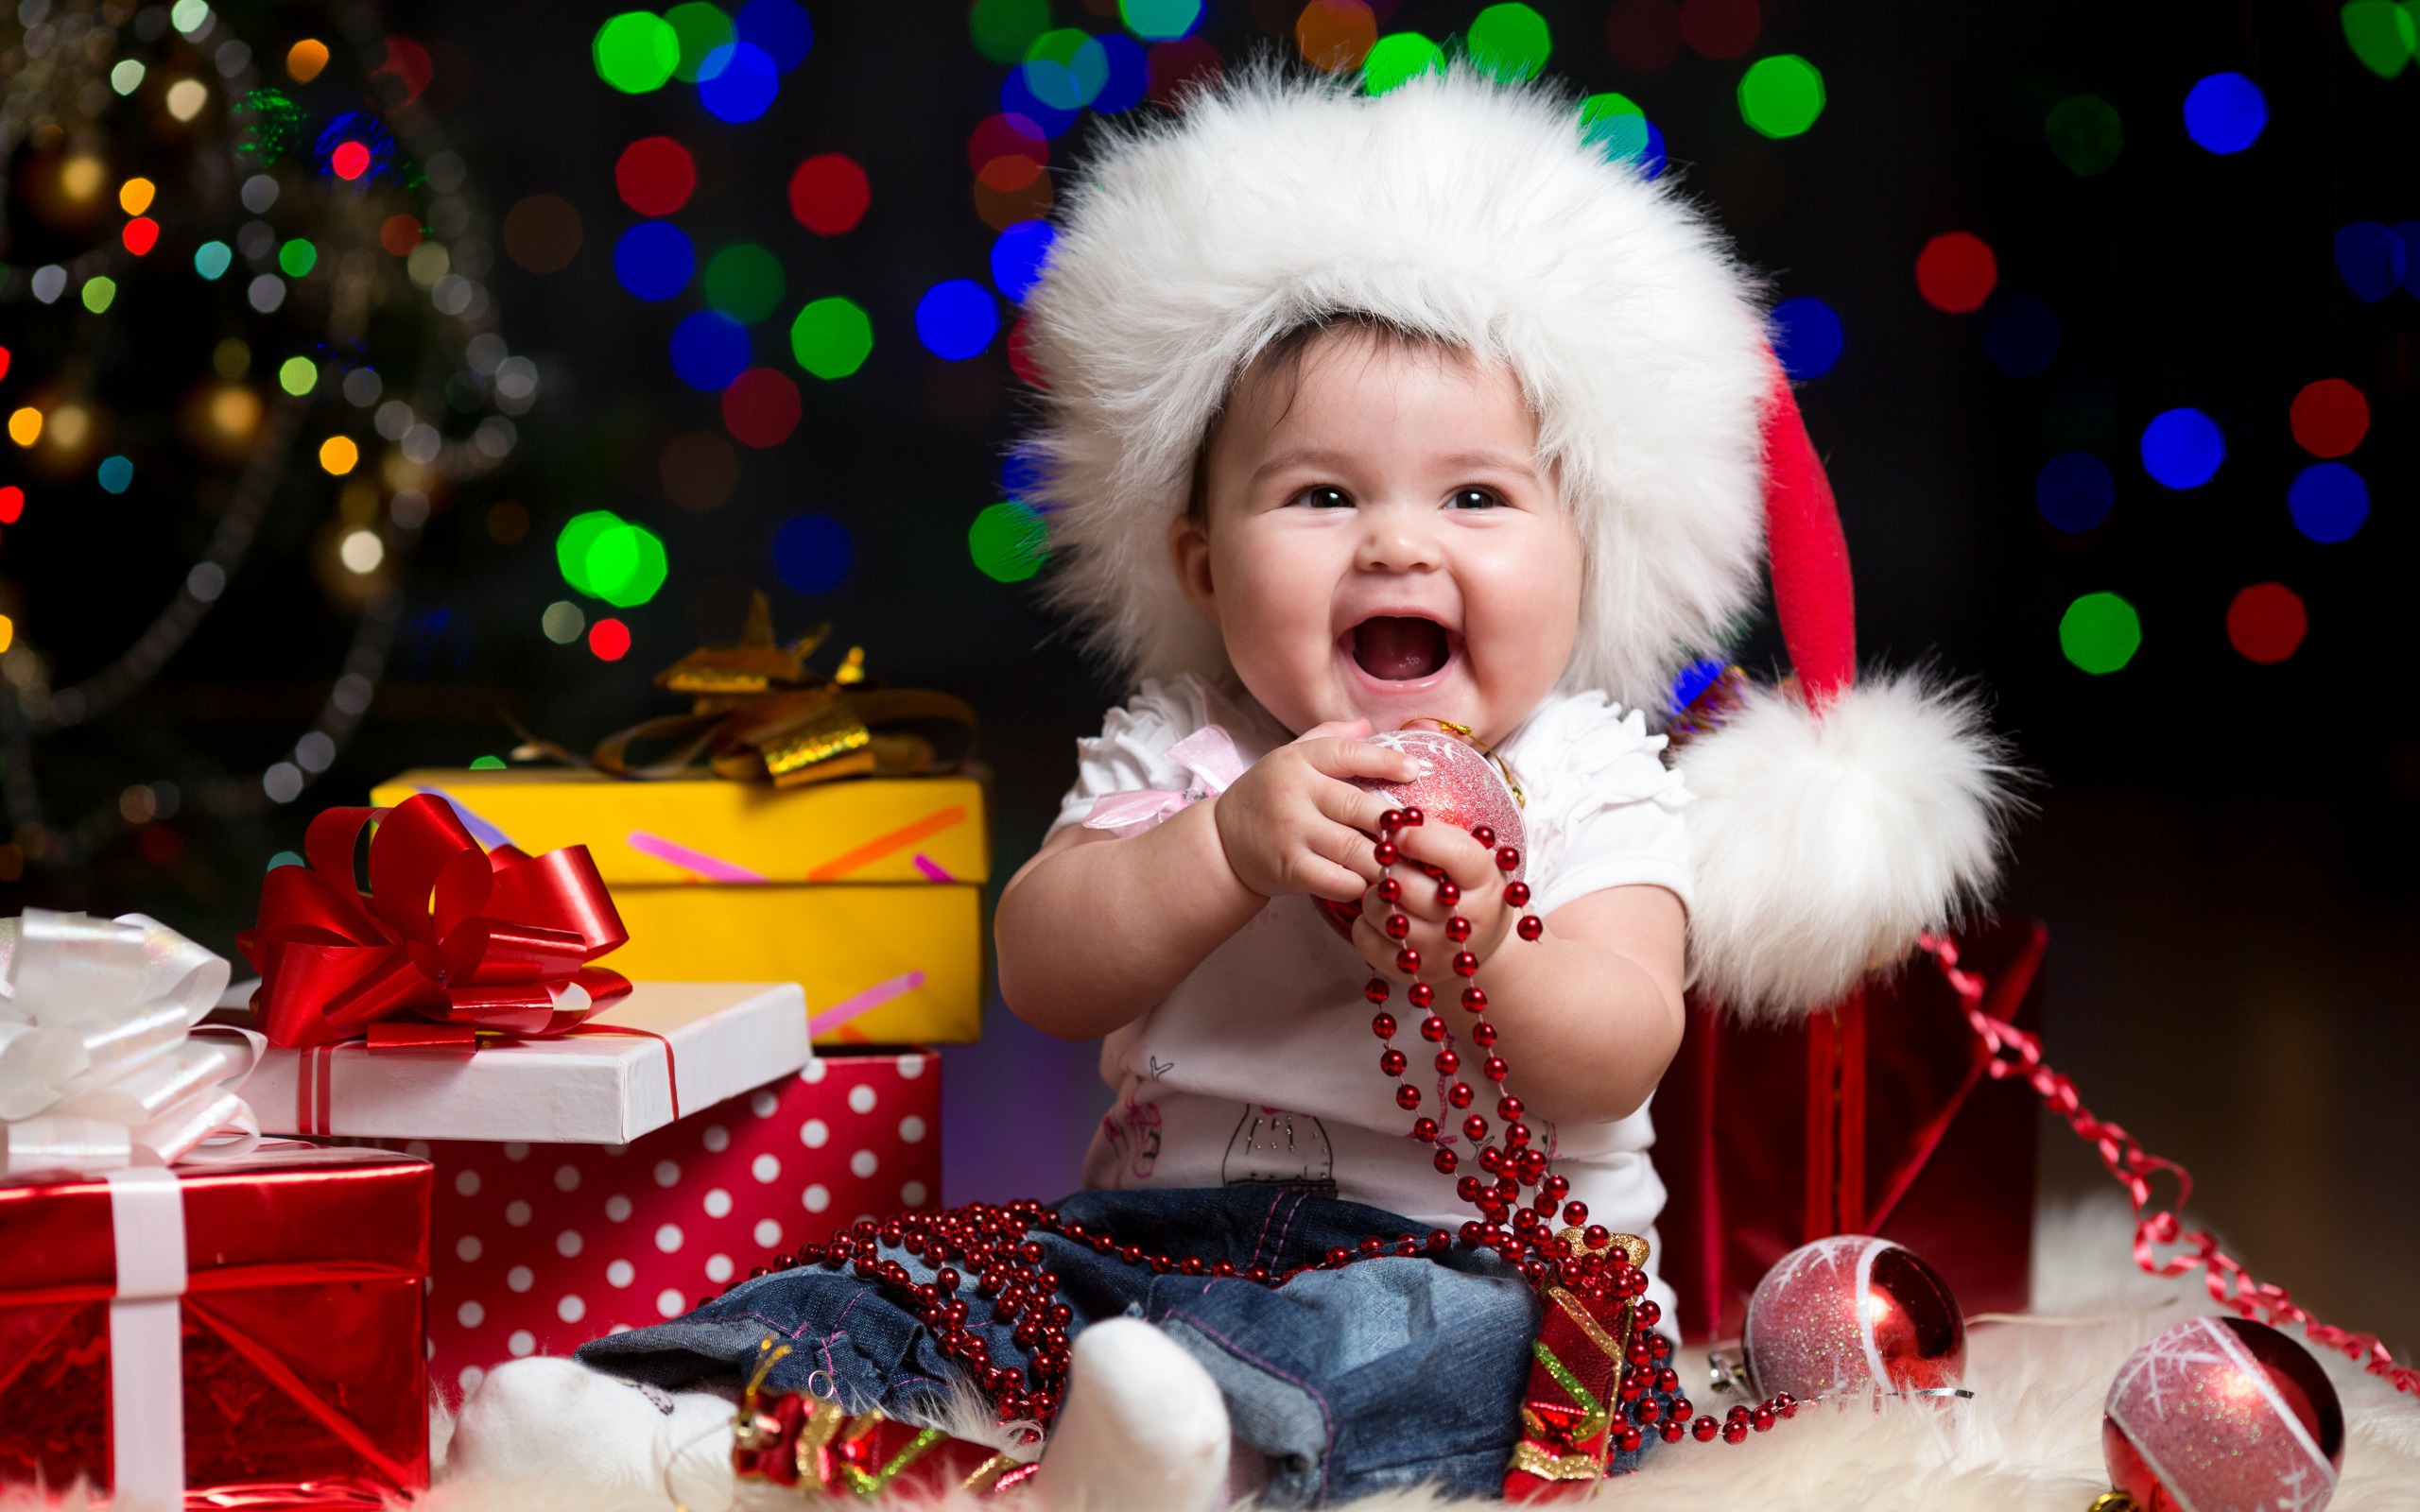 The Happy Child On Christmas Wallpapers And Images Wallpapers